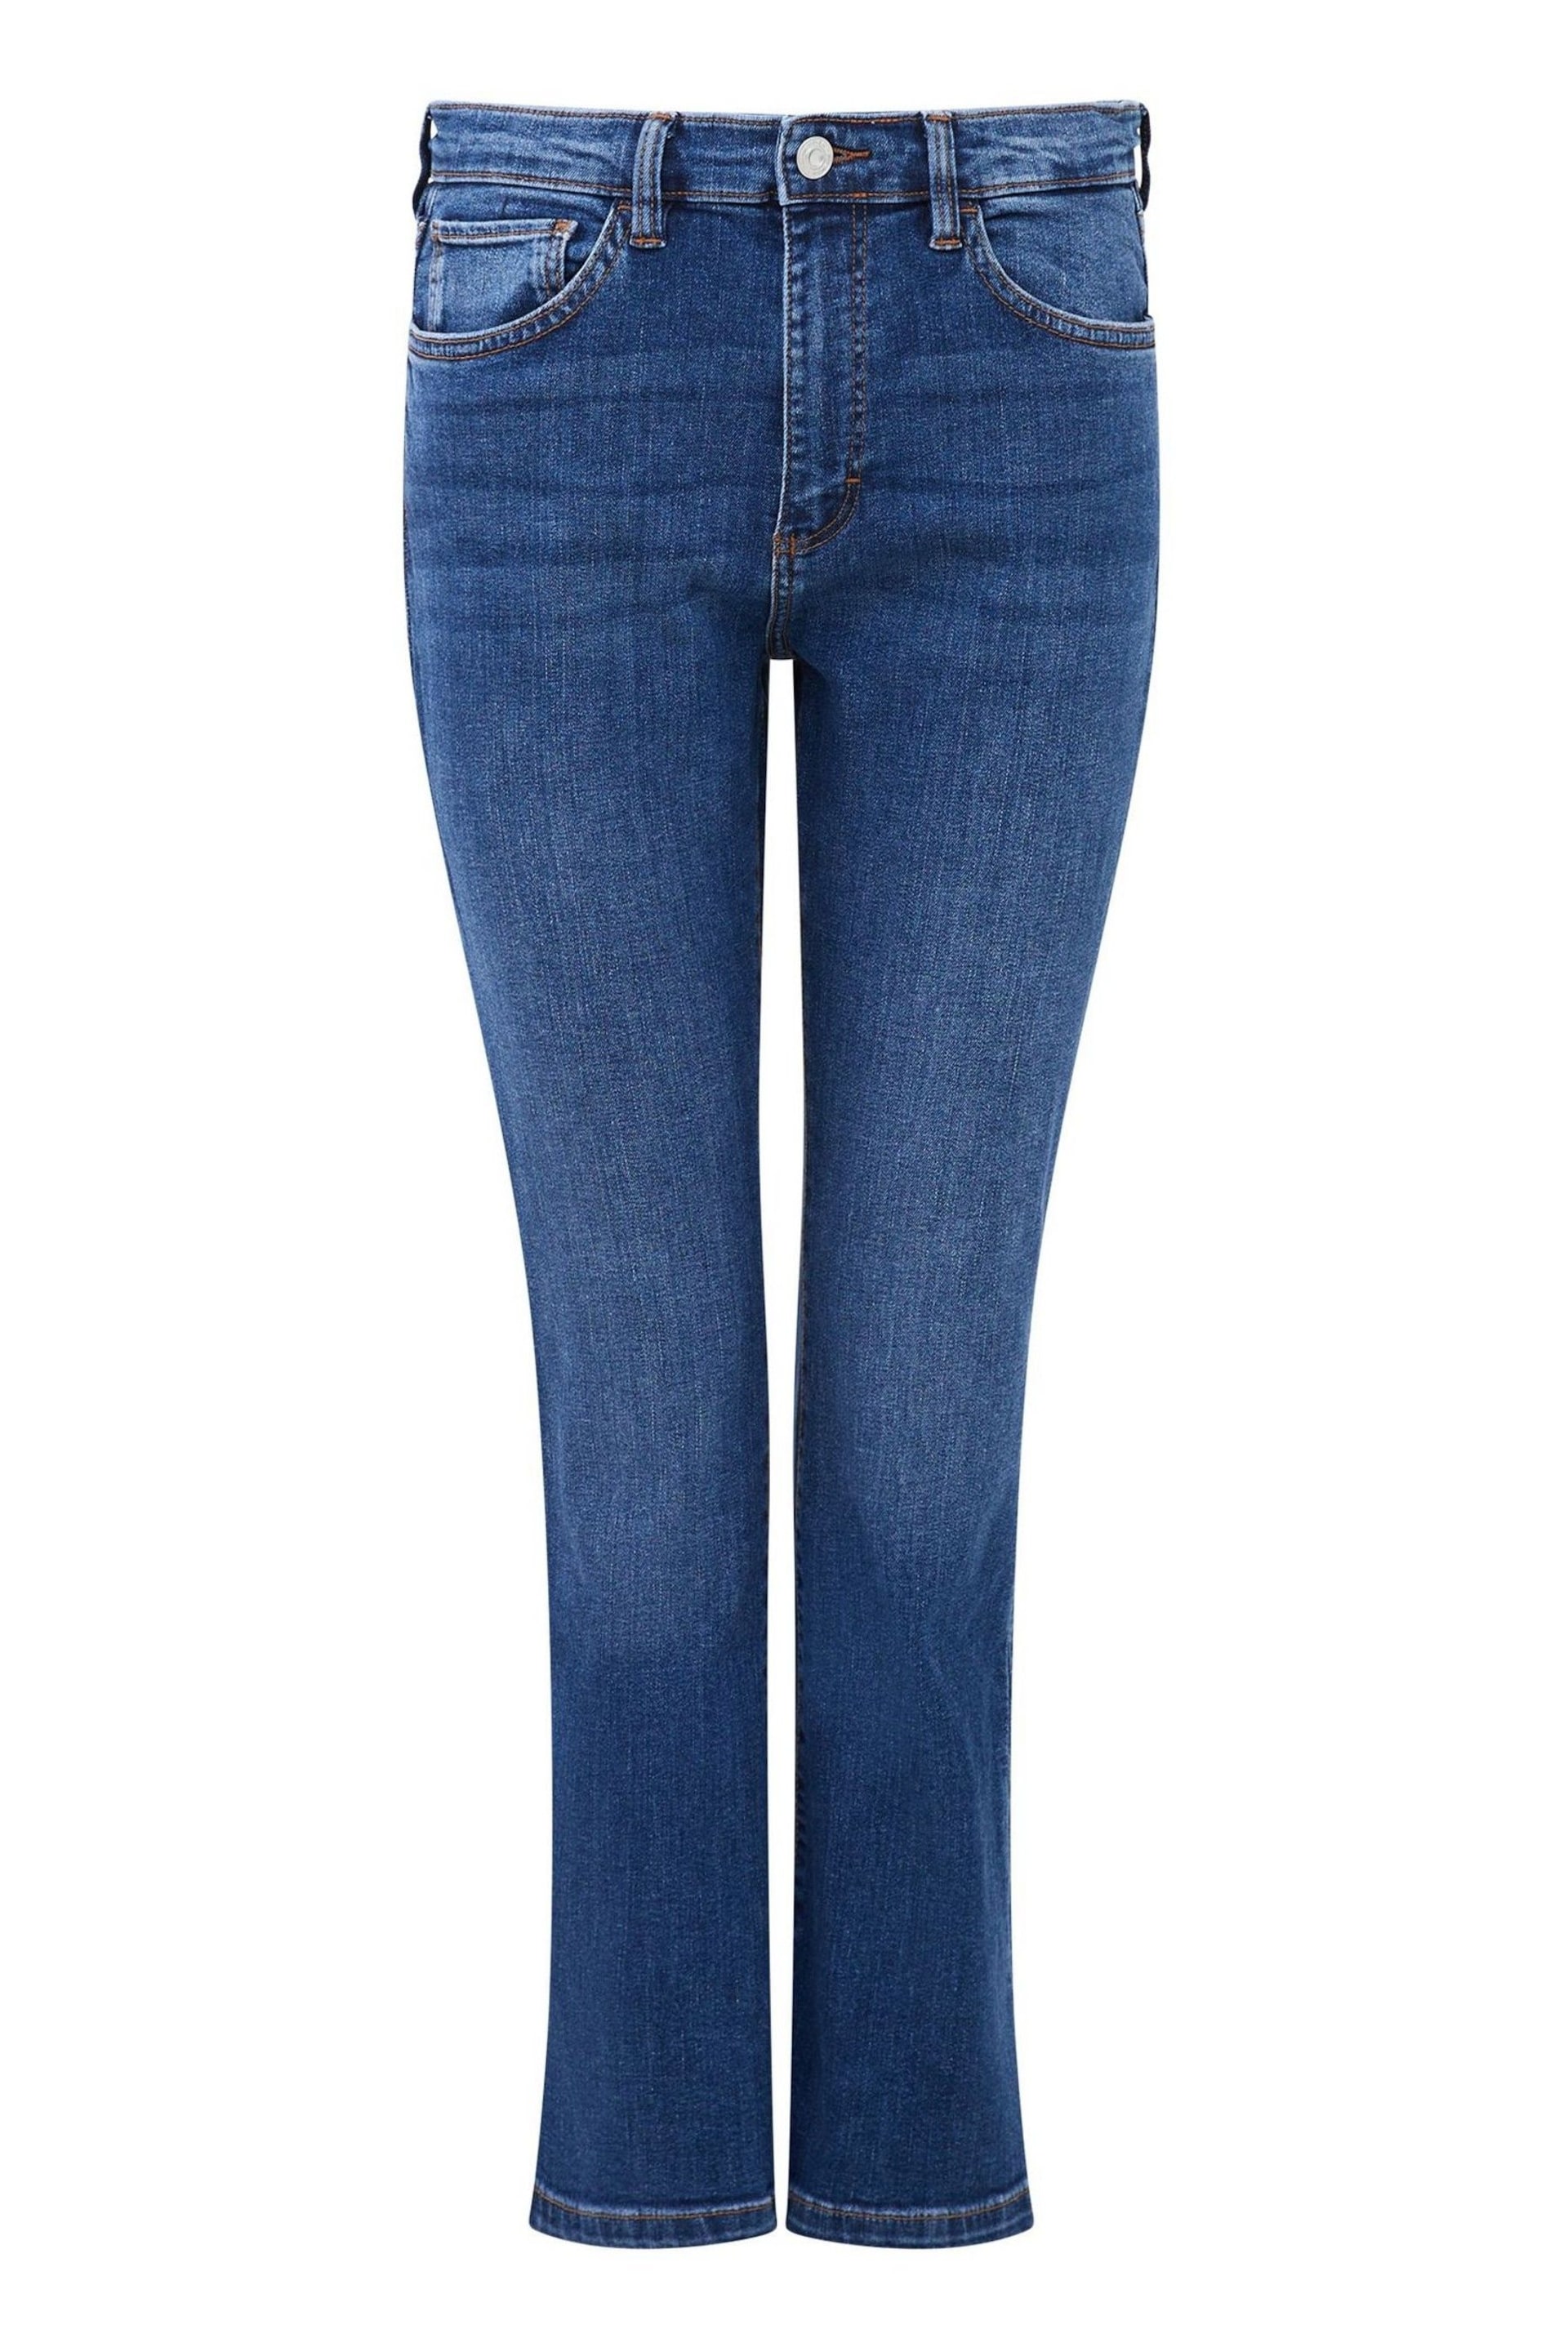 French Connection Stretch Denim BT Cut Ankle Trousers - Image 4 of 4